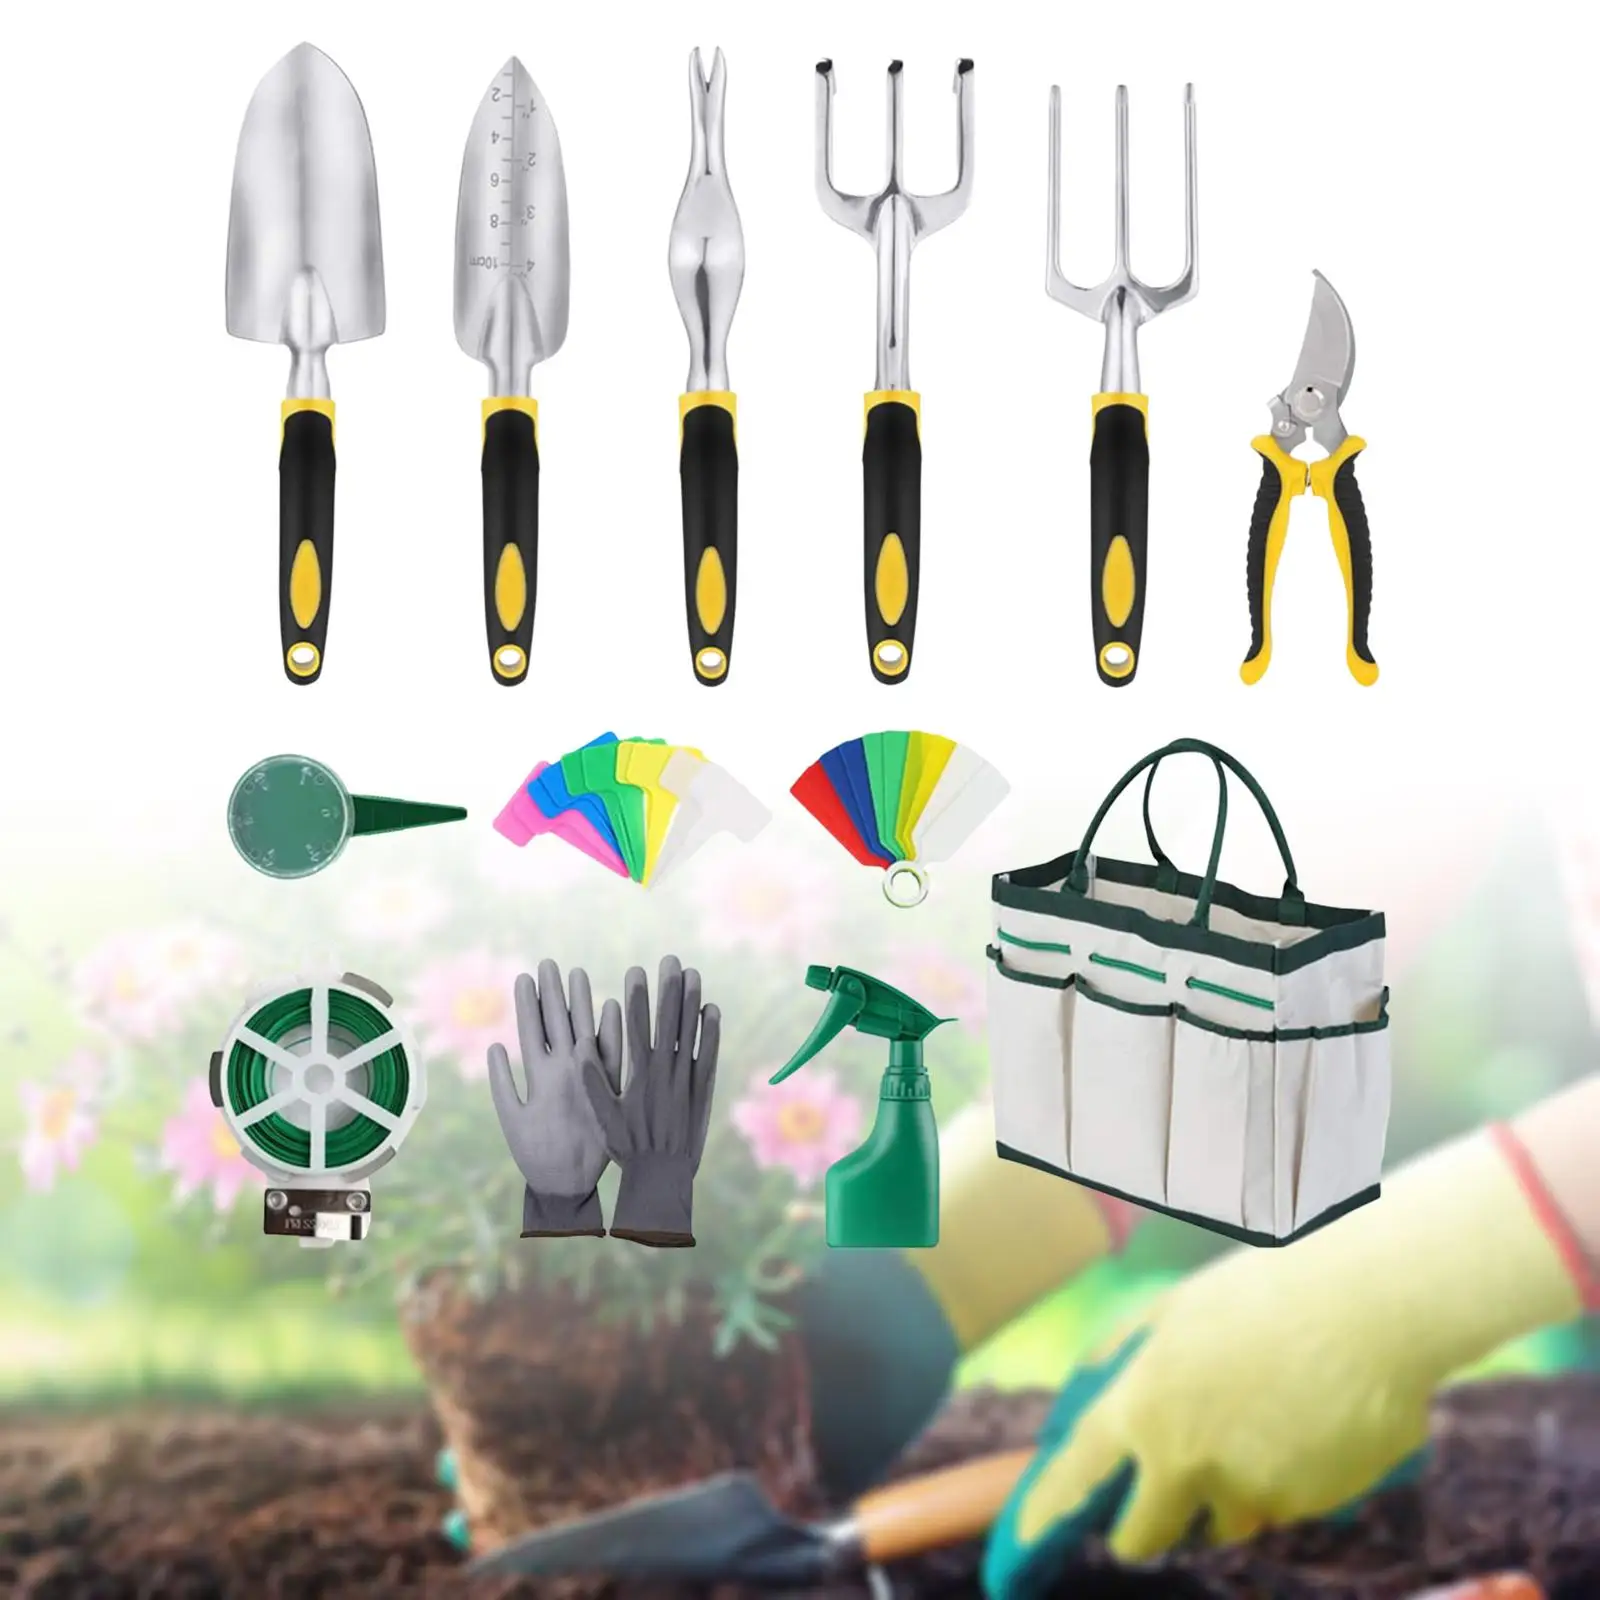 13x Handheld Hand Shovels Cultivation Hand Tool Weeding Tools Hoe Garden Tool Gardening Garden Shovels for Outside Lawn Digging